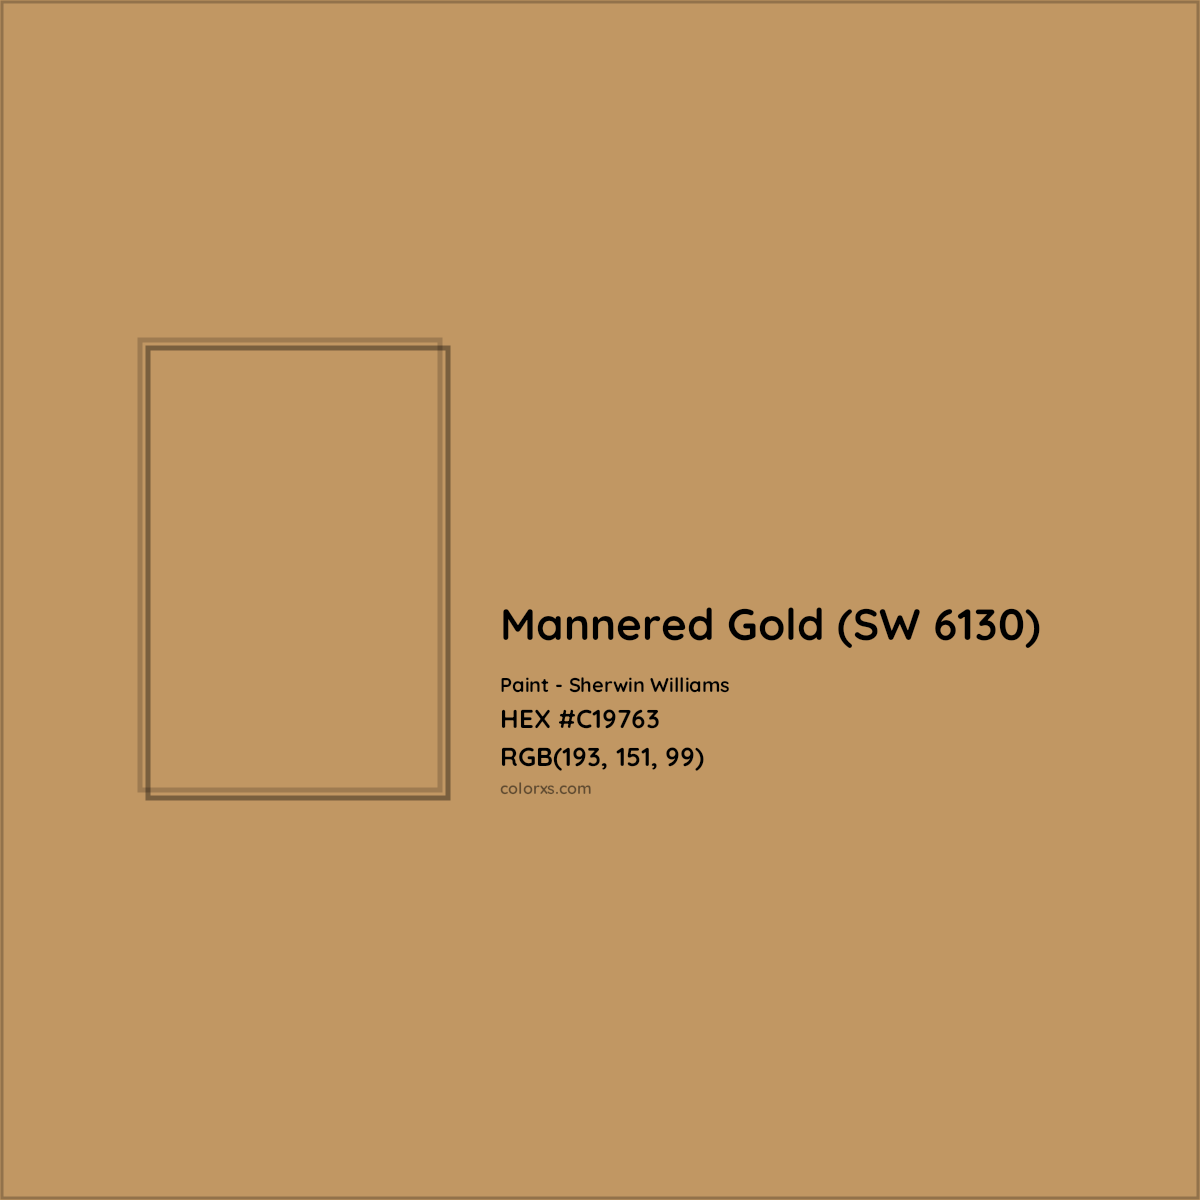 HEX #C19763 Mannered Gold (SW 6130) Paint Sherwin Williams - Color Code